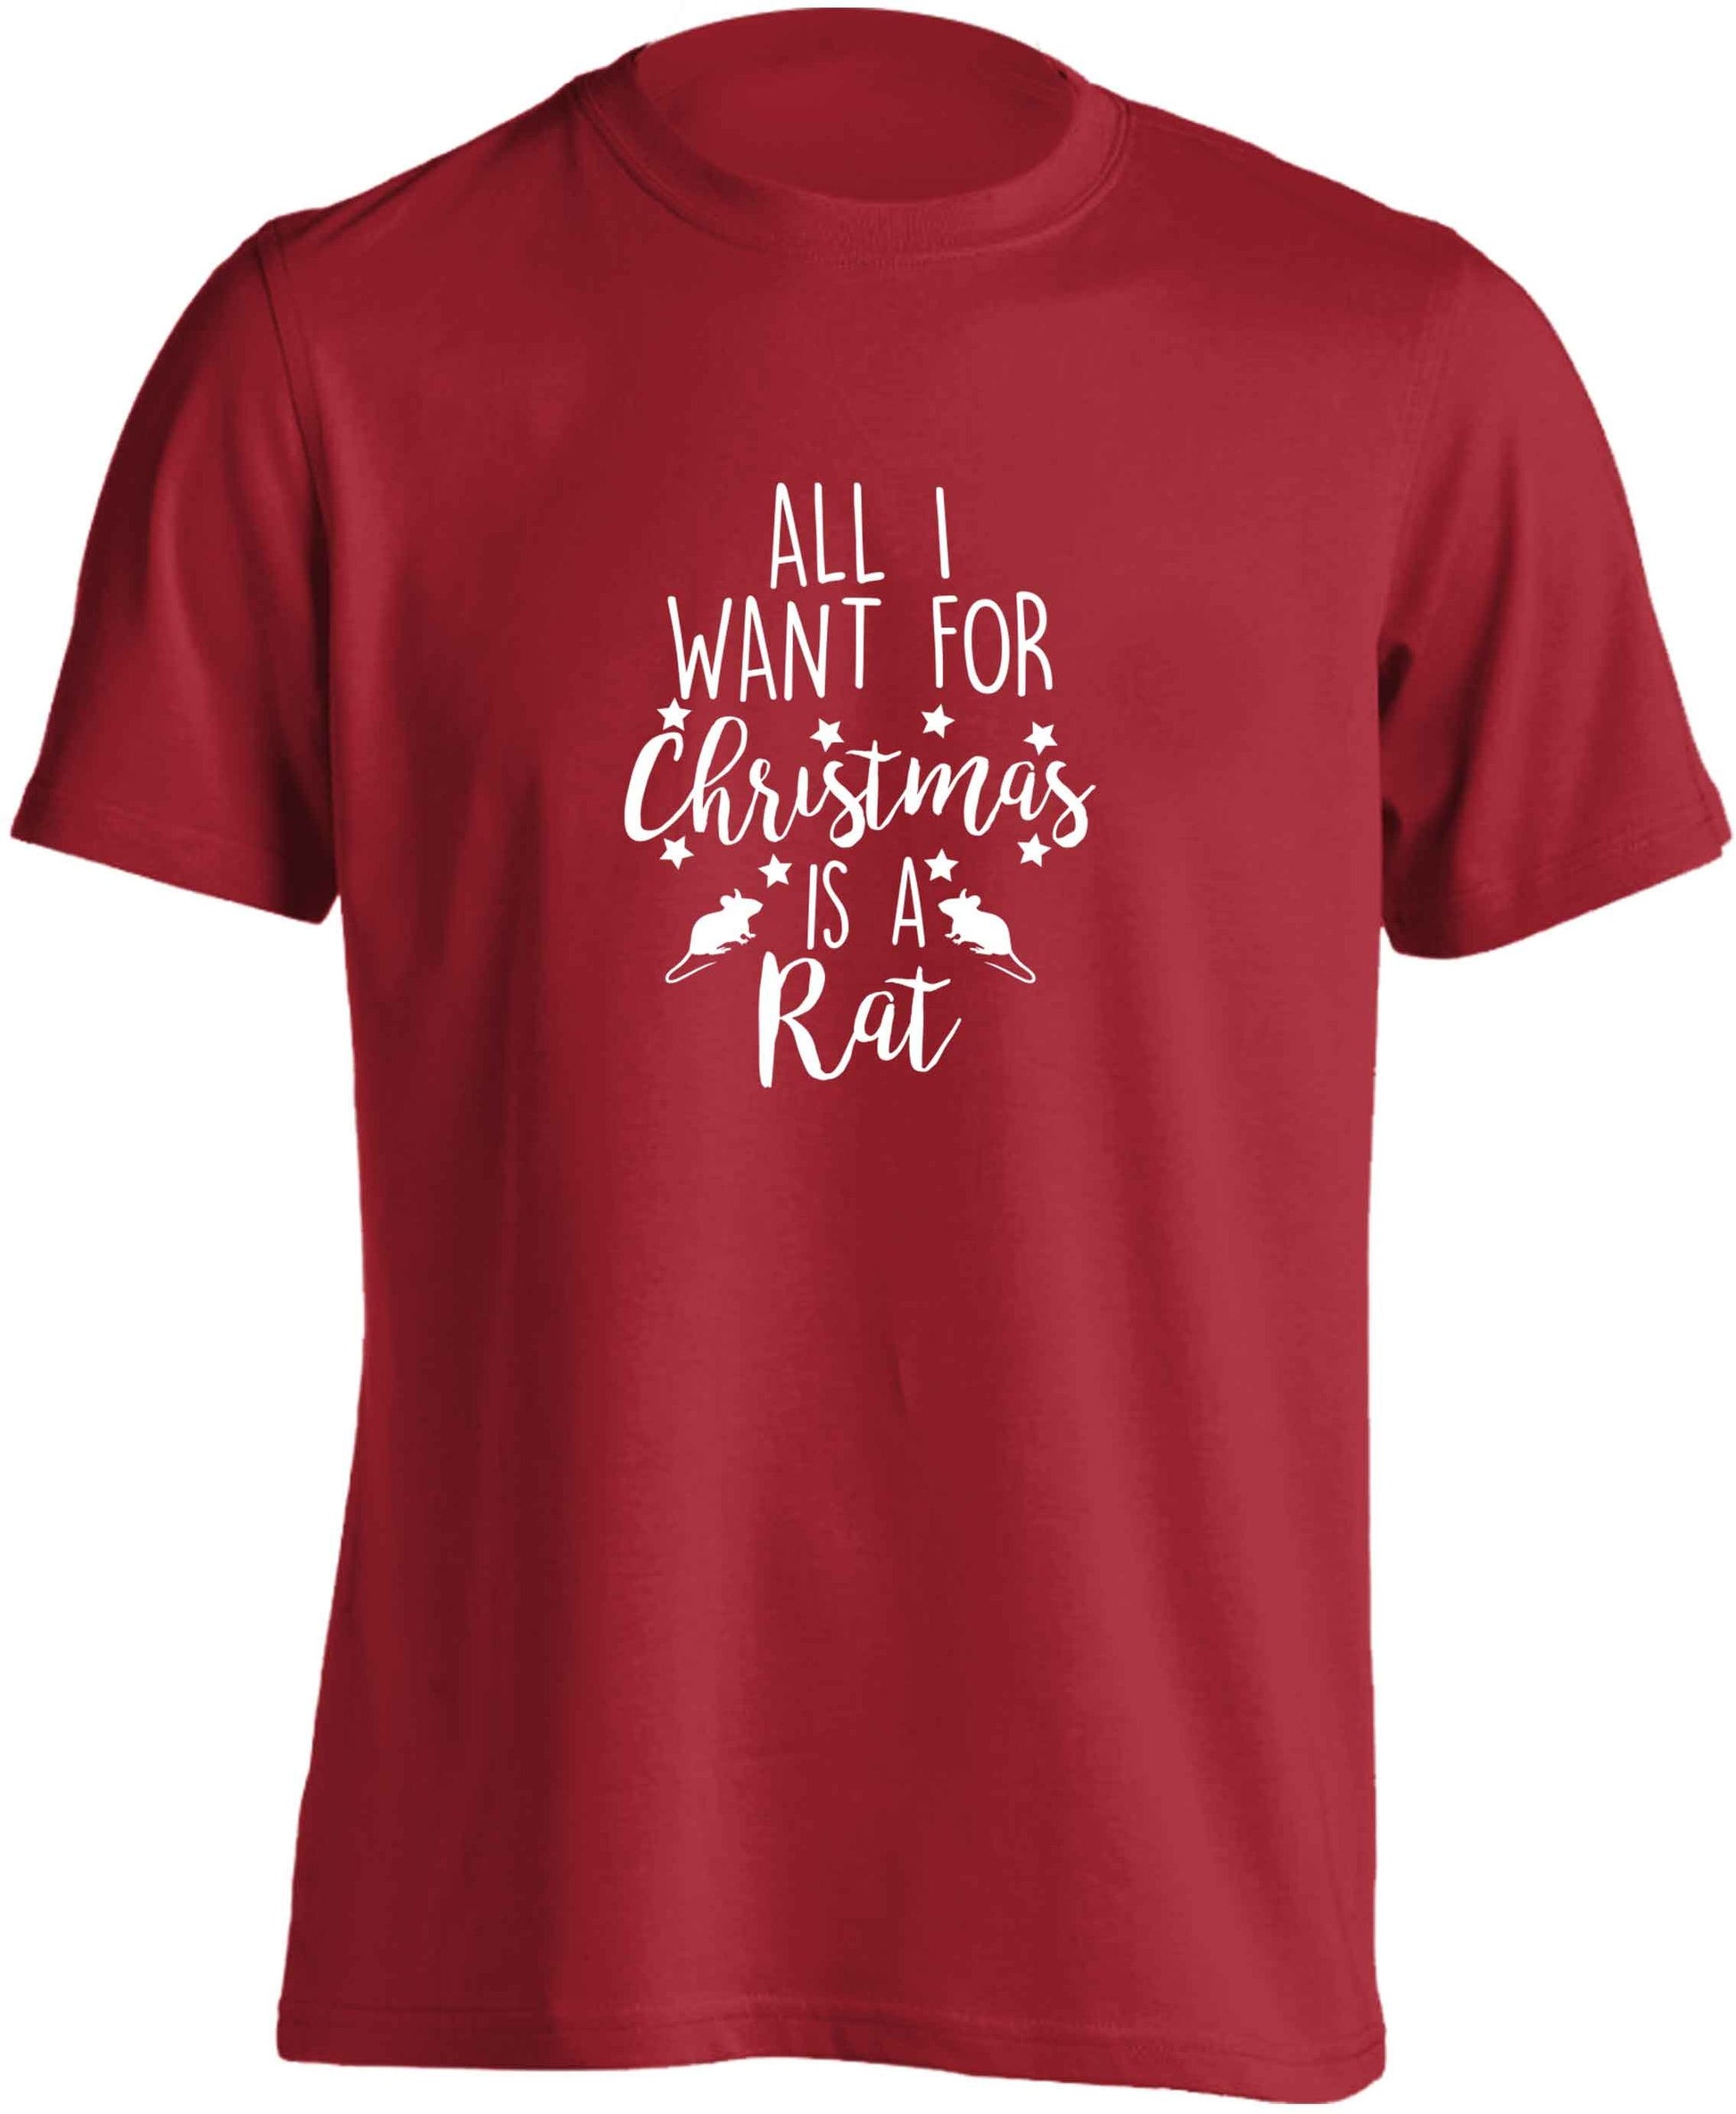 All I want for Christmas is a rat adults unisex red Tshirt 2XL